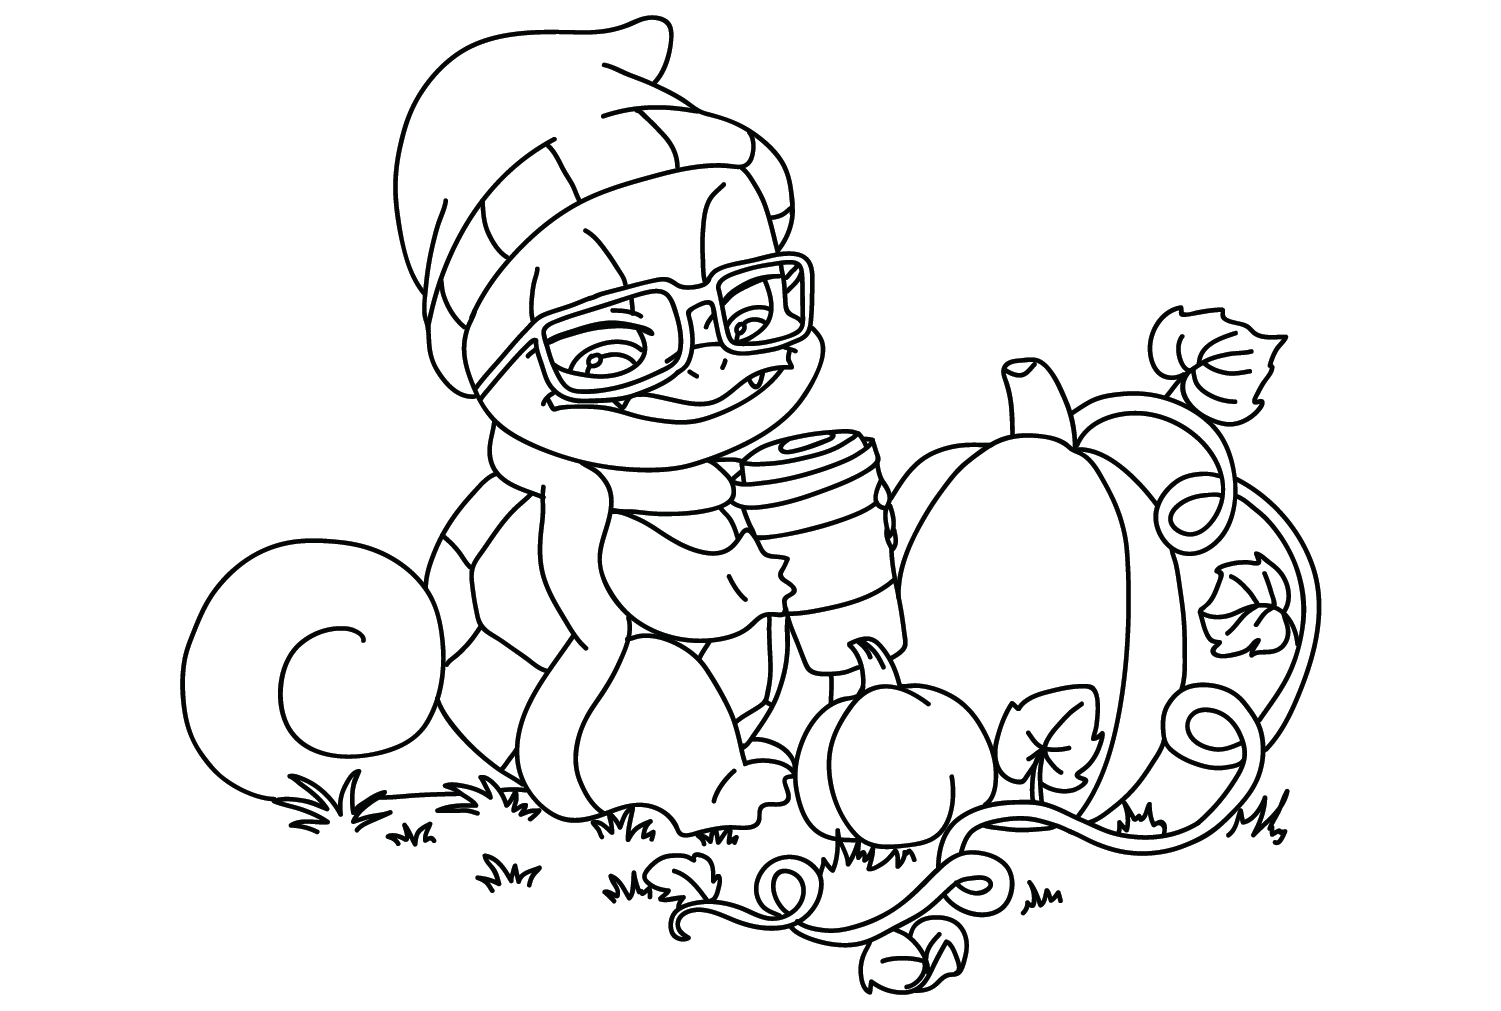 Squirtle Coloring Page Free from Squirtle